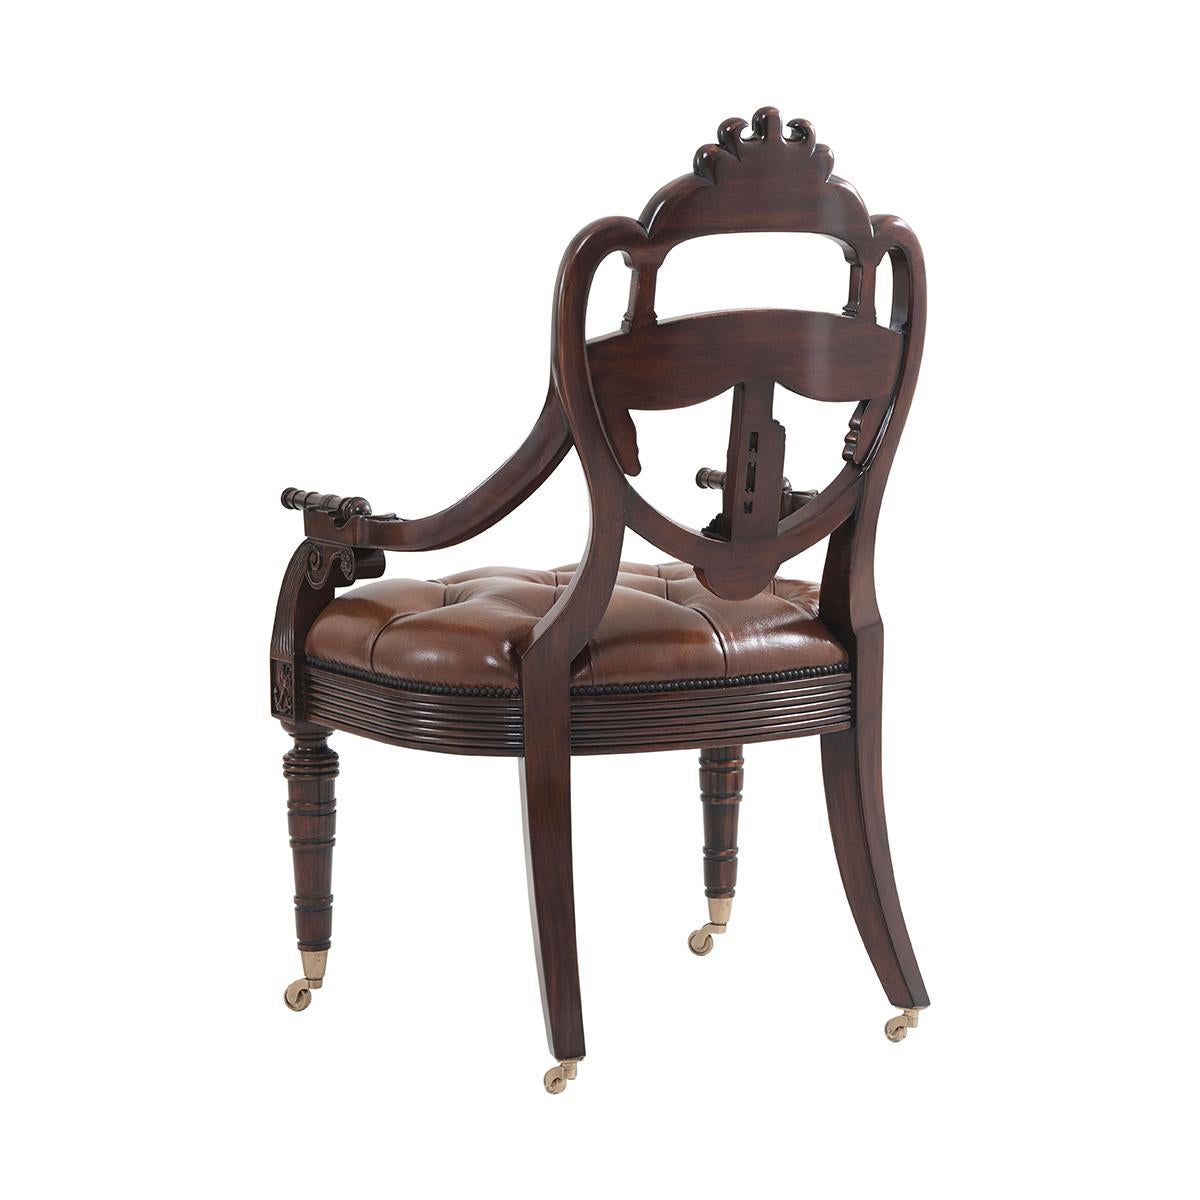 Regency English Armchair - Carved Coat of Arms For Sale